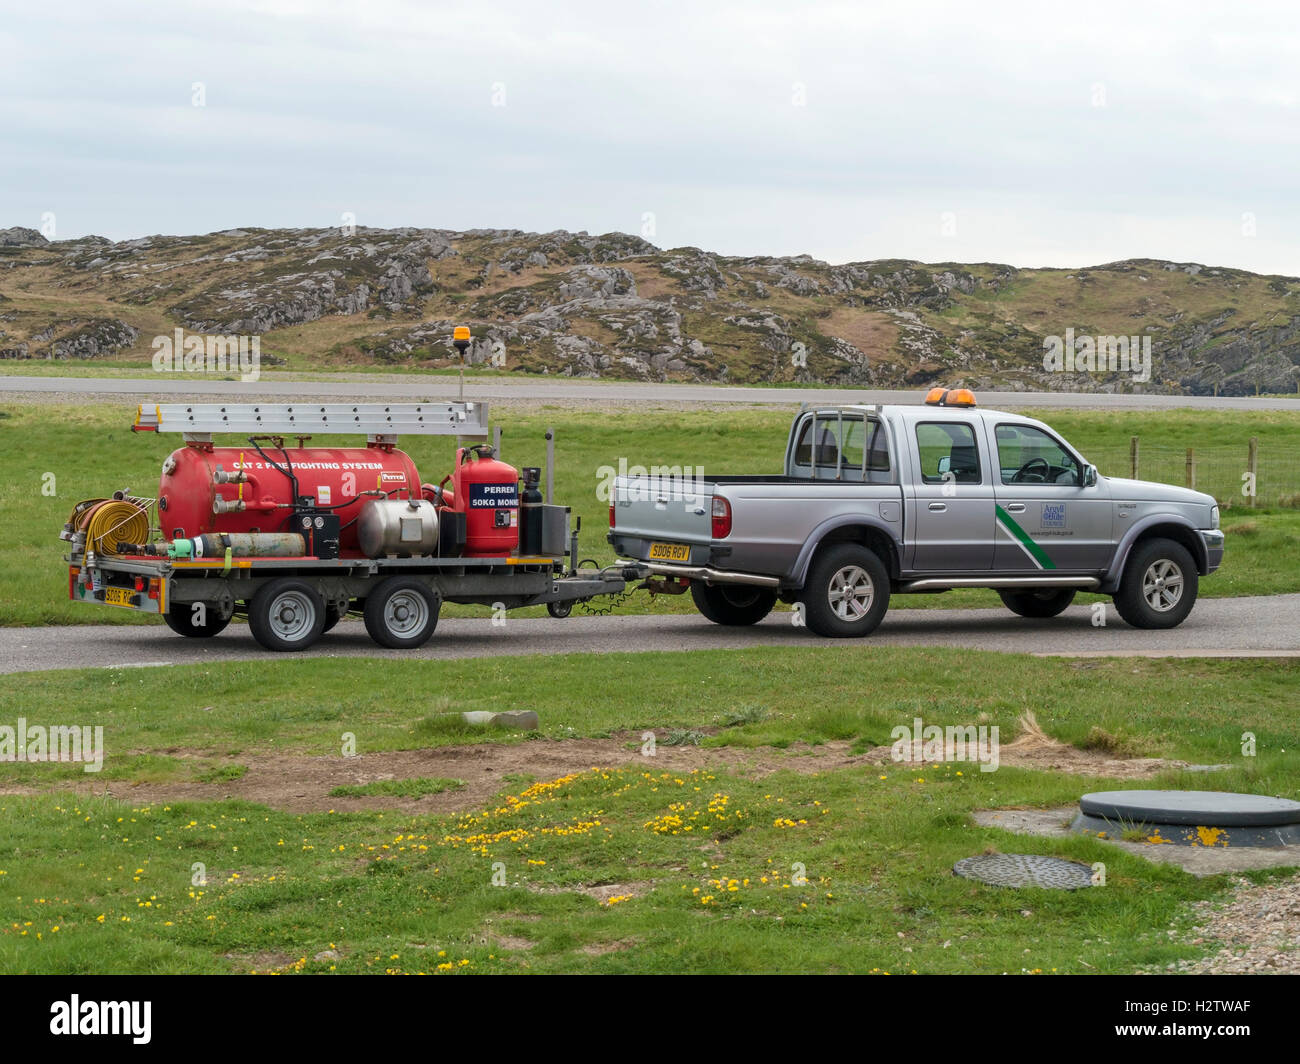 Small emergency fire tender with fire fighting system on trailer, Isle of Colonsay aerodrome, Colonsay, UK. Stock Photo